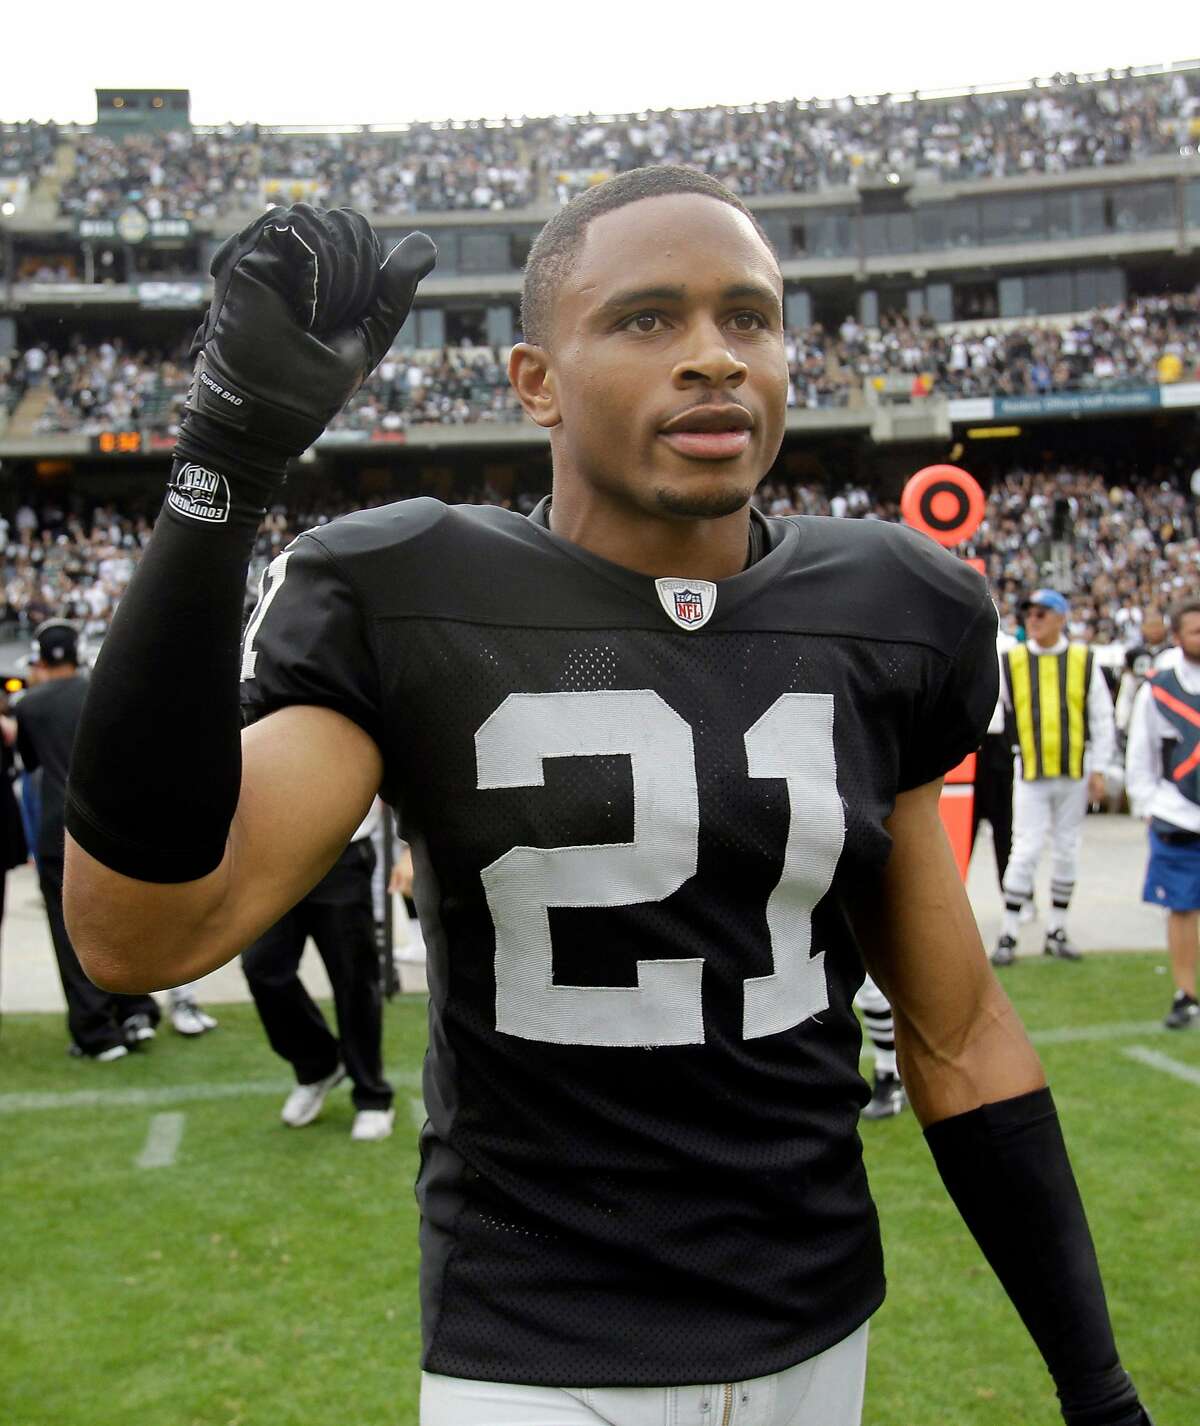 FILE - This Sept. 19, 2010, file photo shows Oakland Raiders cornerback Nnamdi Asomugha (21) at an NFL football game in Oakland, Calif. The challenge: taking more than 1,000 players and sorting them onto 32 rosters, working out contracts that must be signed and then processed by the league office, with every deal from rookies to free agents fitting under the salary cap and falling within the other boundaries of the new, still-being-understood labor agreement _ and, getting all this done in time for the start of the preseason, preferably by the start of training camp. (AP Photo/Paul Sakuma, File)